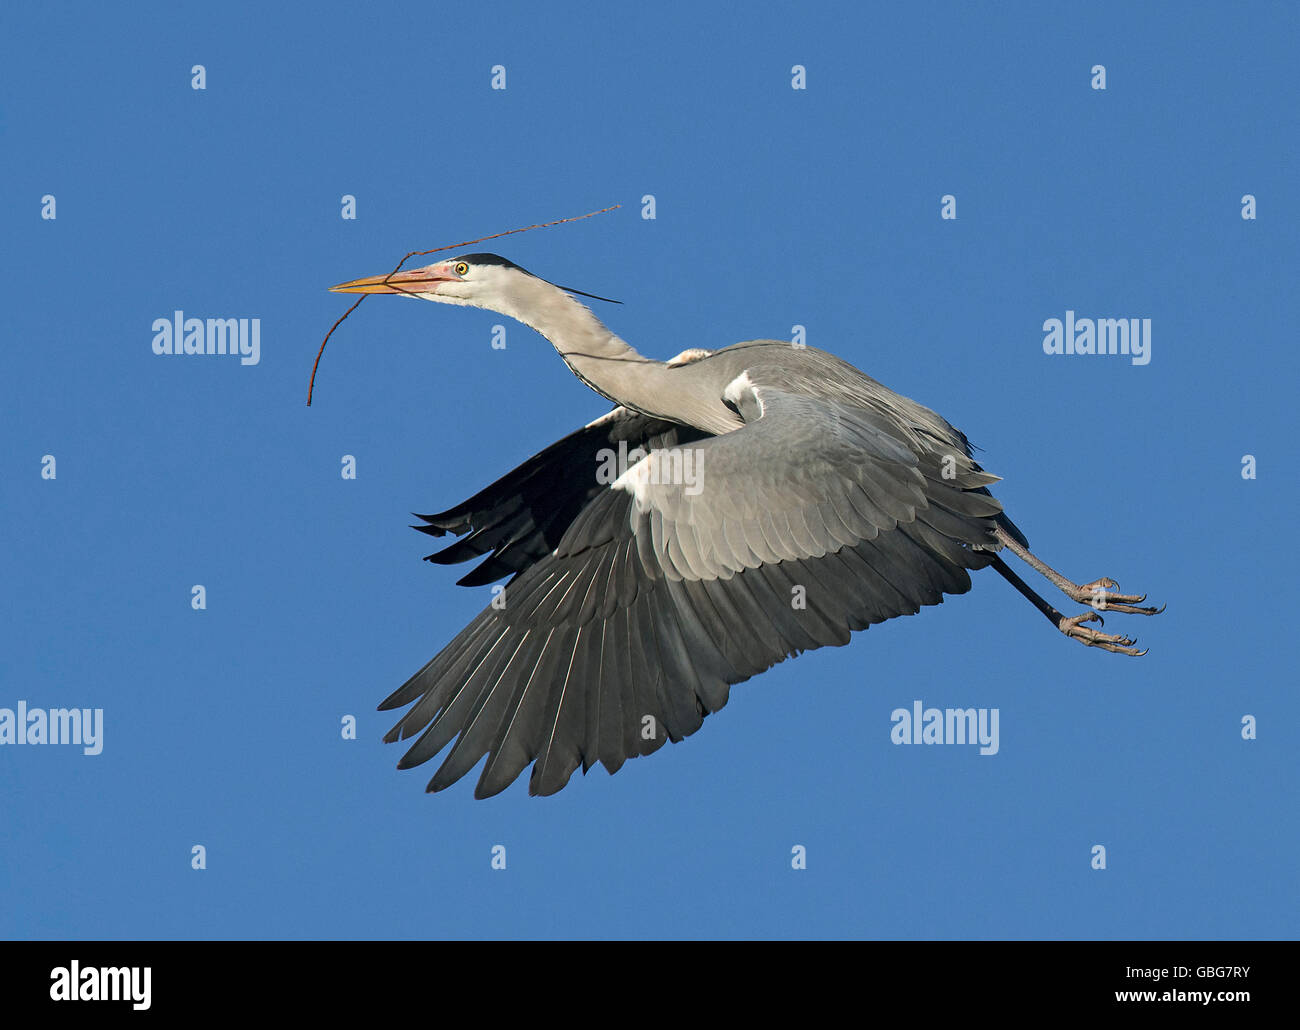 Grey Heron (Ardea cinerea) flying with branch in the beak, view from side, Blackpool, UK Stock Photo